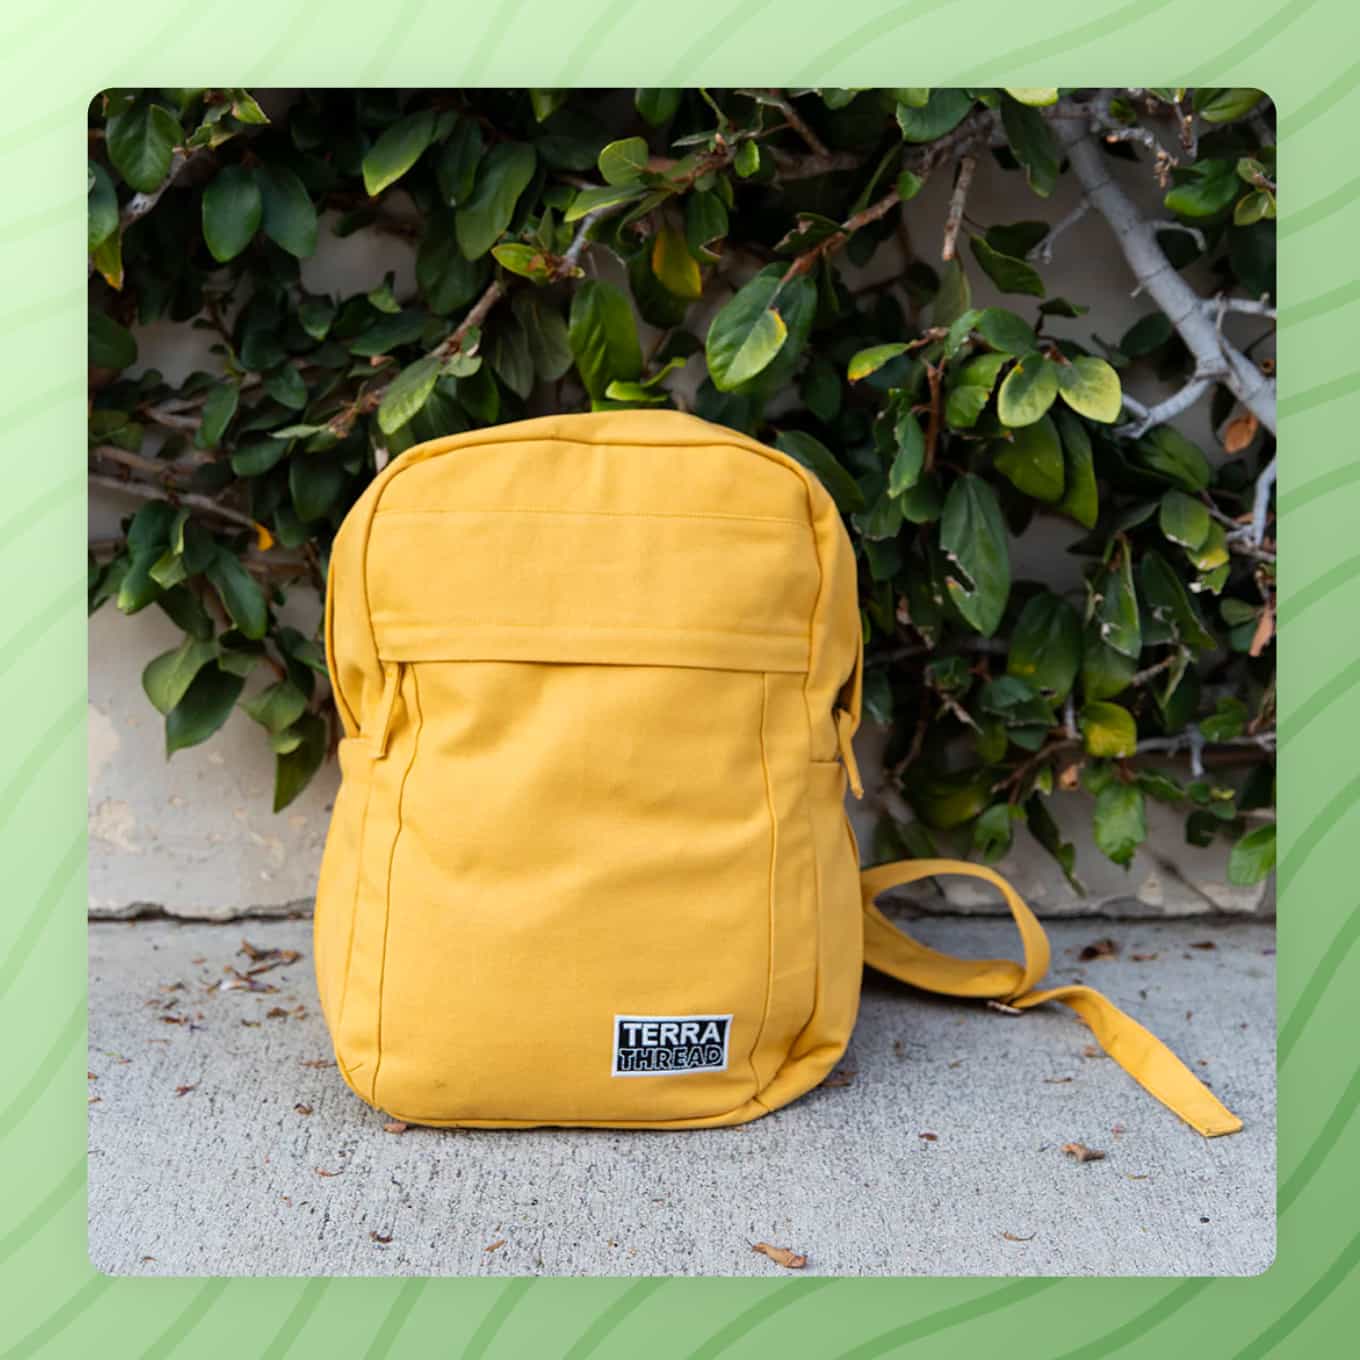 A yellow eco-friendly backpack